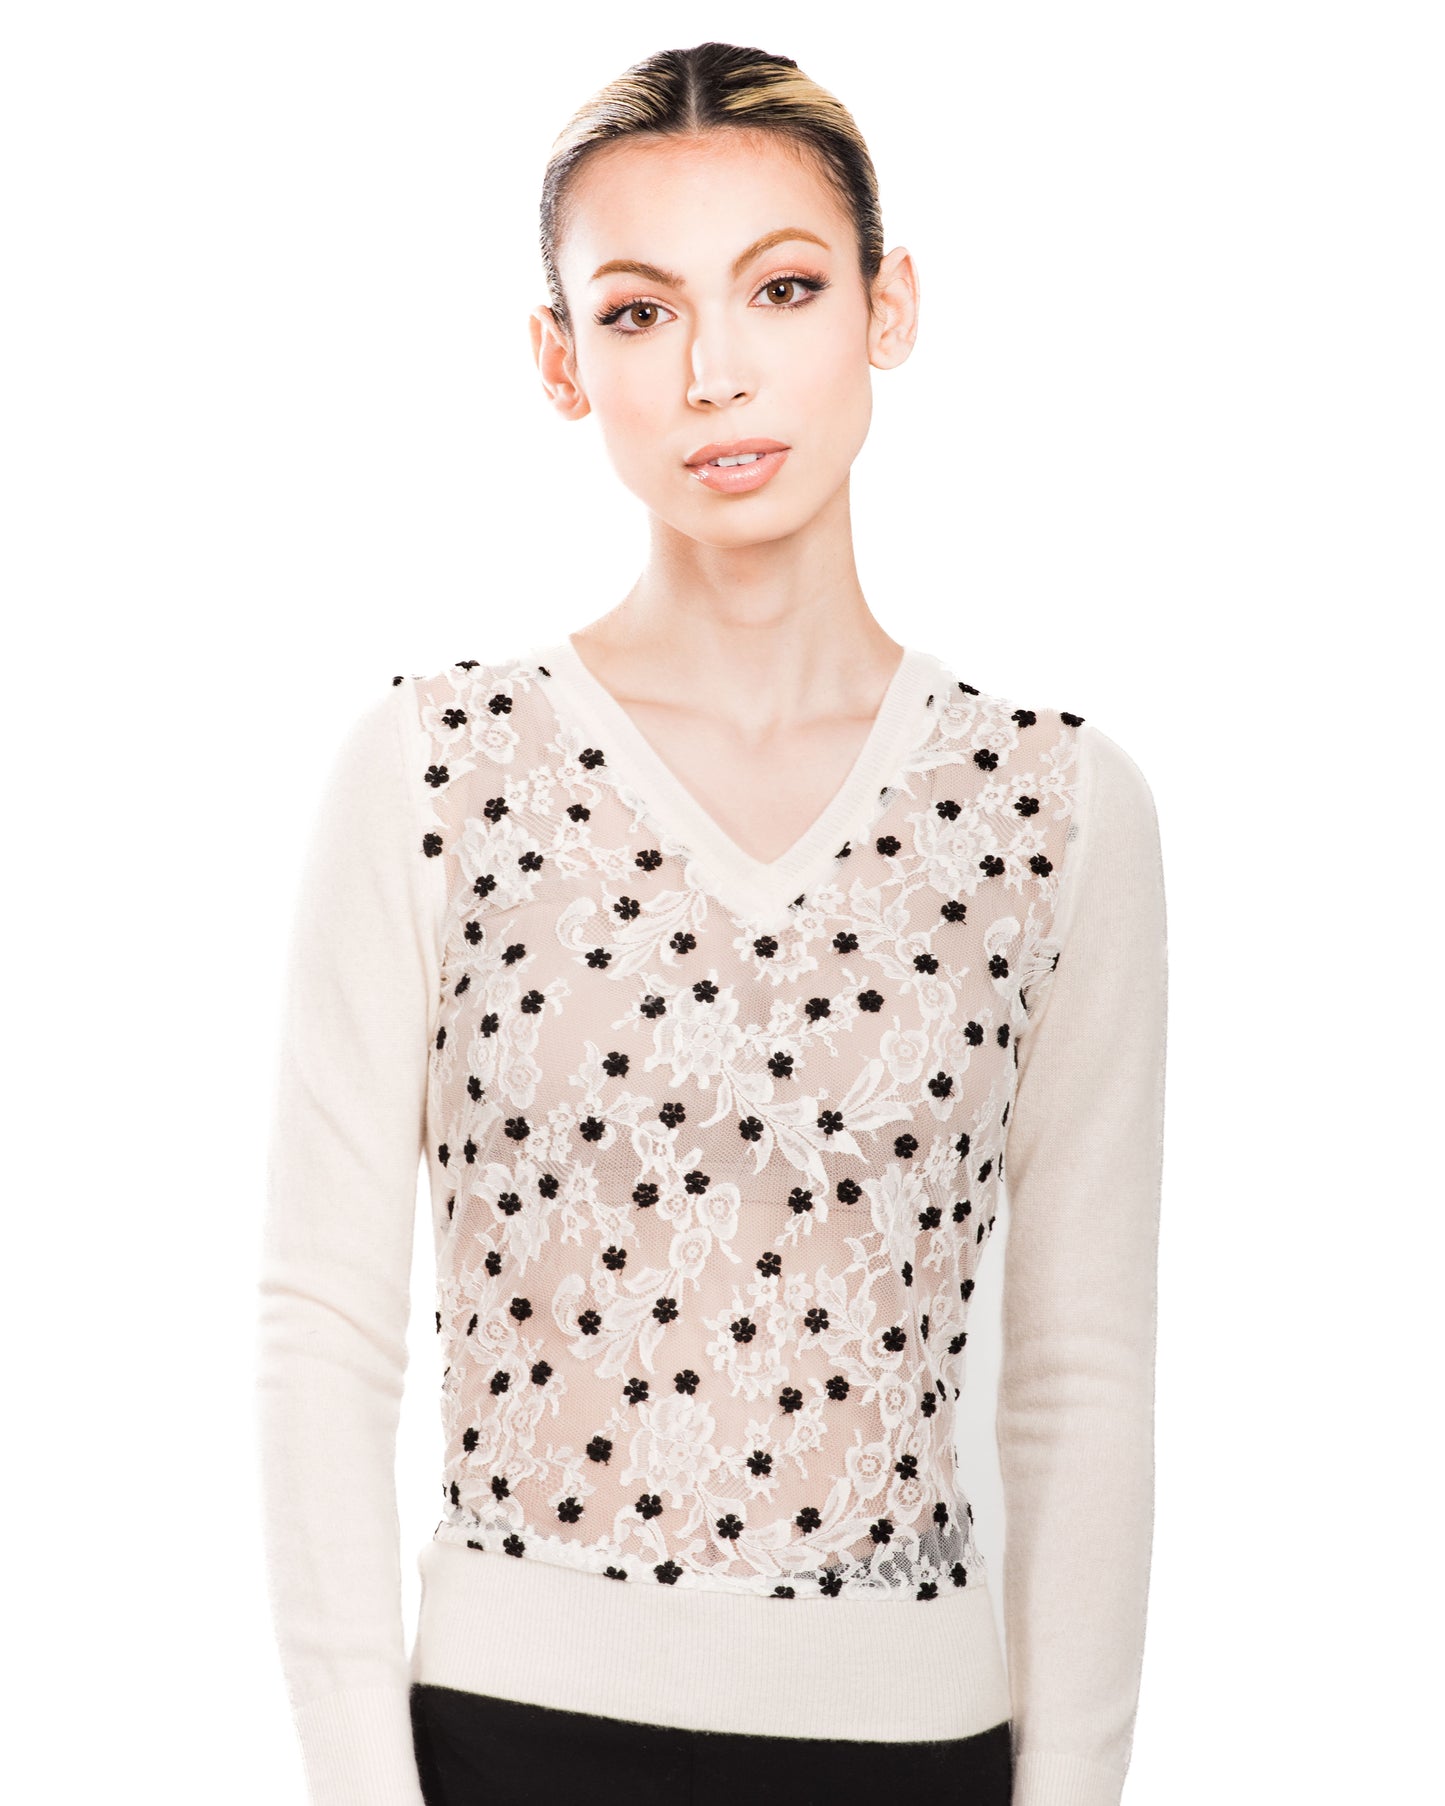 XS WHITE V-NECK LONG SLEEVE CASHMERE SWEATER WITH VINTAGE WHITE ITALIAN LACE AND 3D BLACK FLOWERS LINED IN WHITE TULLE